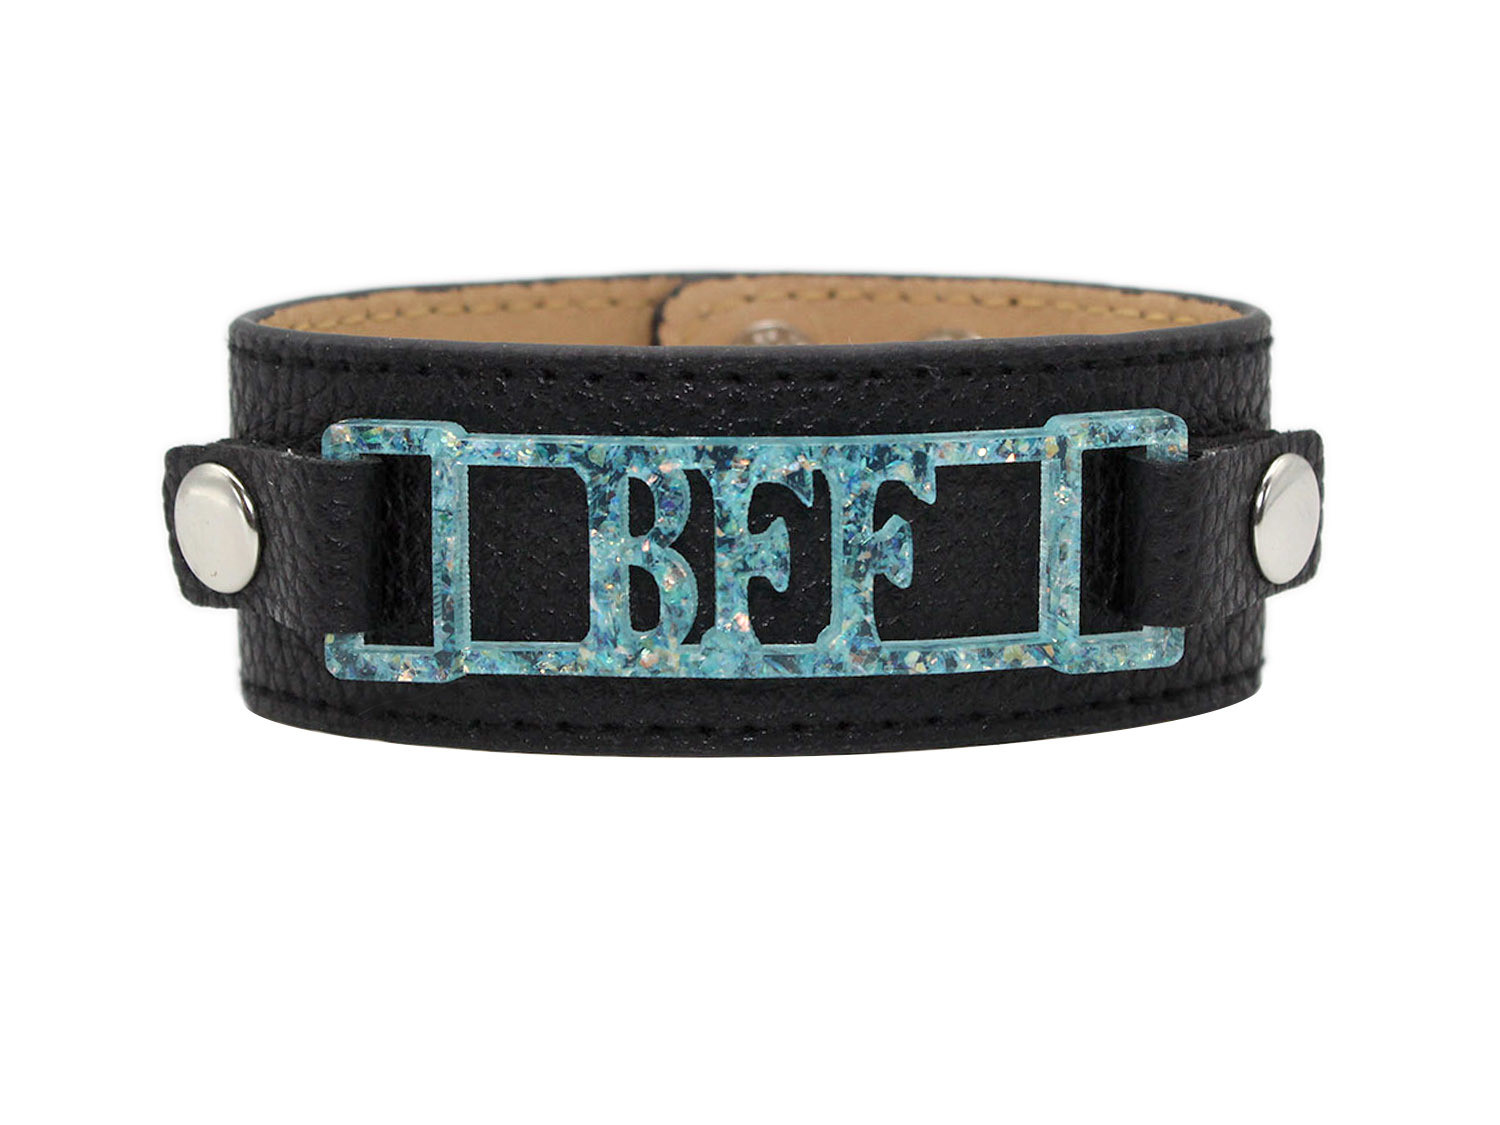 Classic Cuff with Zoe Style Plaque "BFF"